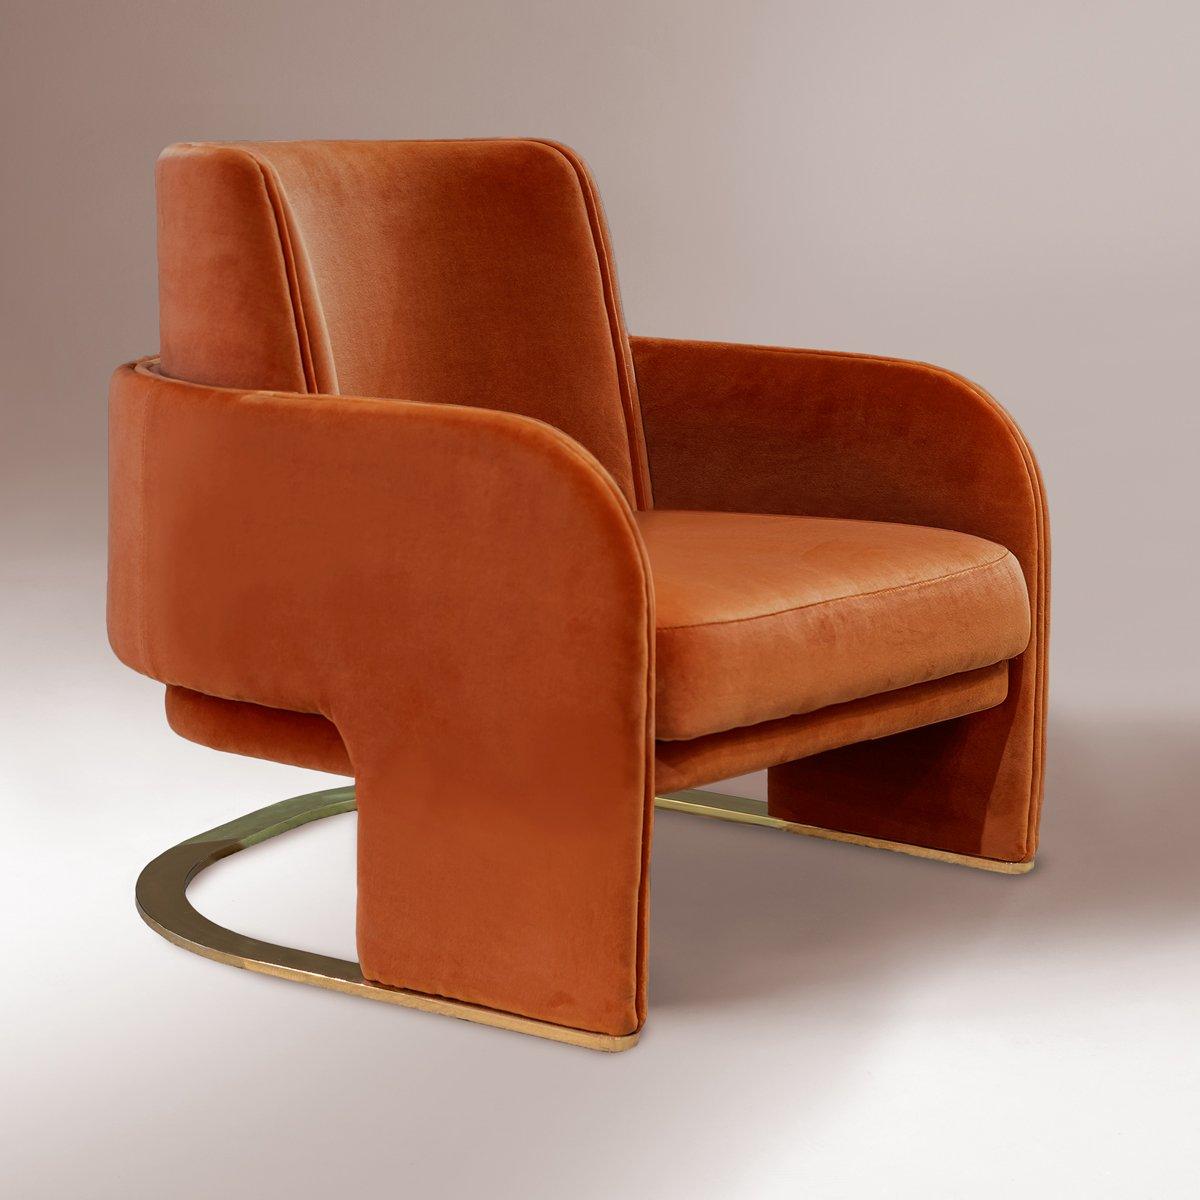 Odisseia armchair by Dooq
Dimensions:
W 71 x D 66 x H 75 x Seat H 41 cm

Materials and finishes
Base and feet in stainless steel plated polished or satin: brass, copper or nickel. Upholstery: seat, armrests and back fully upholstered in fabric